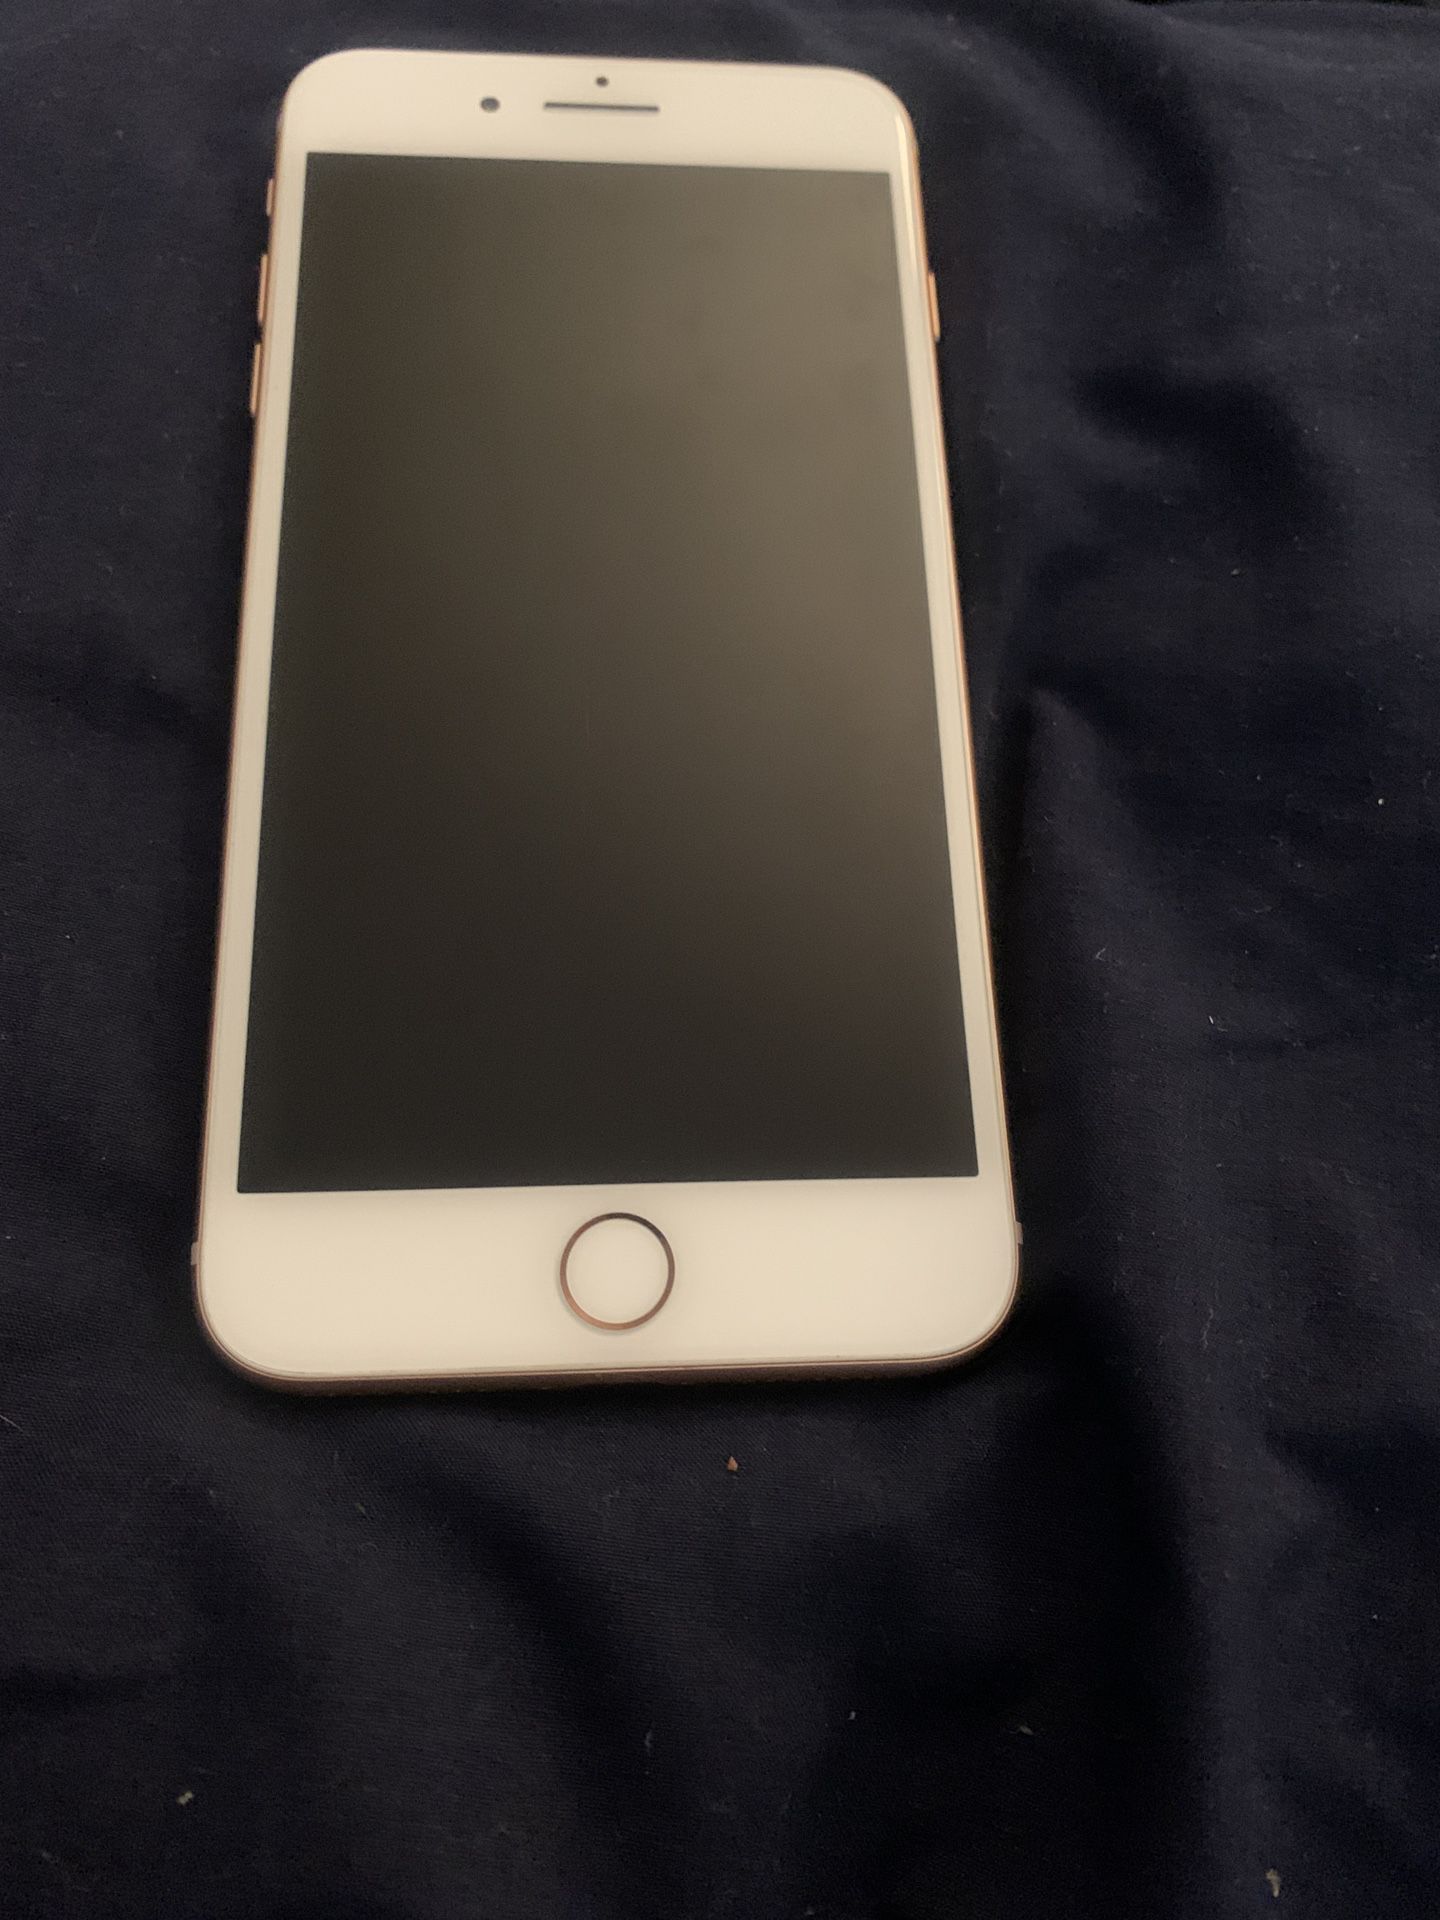 256 gb , iPhone 8 Plus, AT&T, excellent condition, no cracks and works well.